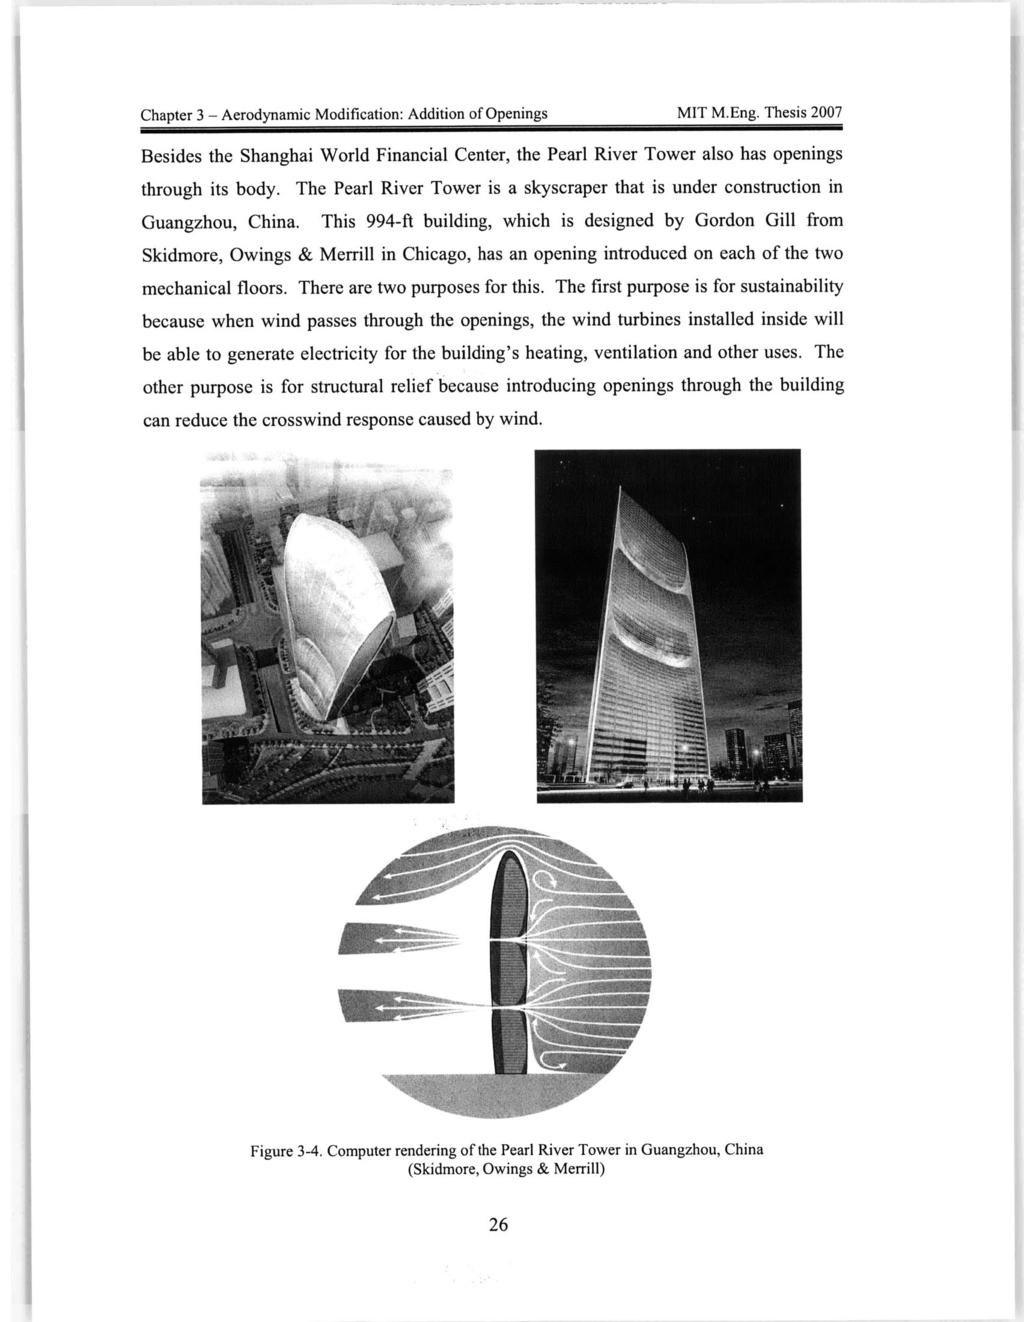 Chapter 3 - Aerodynamic Modification: Addition of Openings MIT M.Eng. Thesis 007 Chapter 3 - Aerodynamic Modification: Addition of Openings MIT M.Eng. Thesis 007 Besides the Shanghai World Financial Center, the Pearl River Tower also has openings through its body.